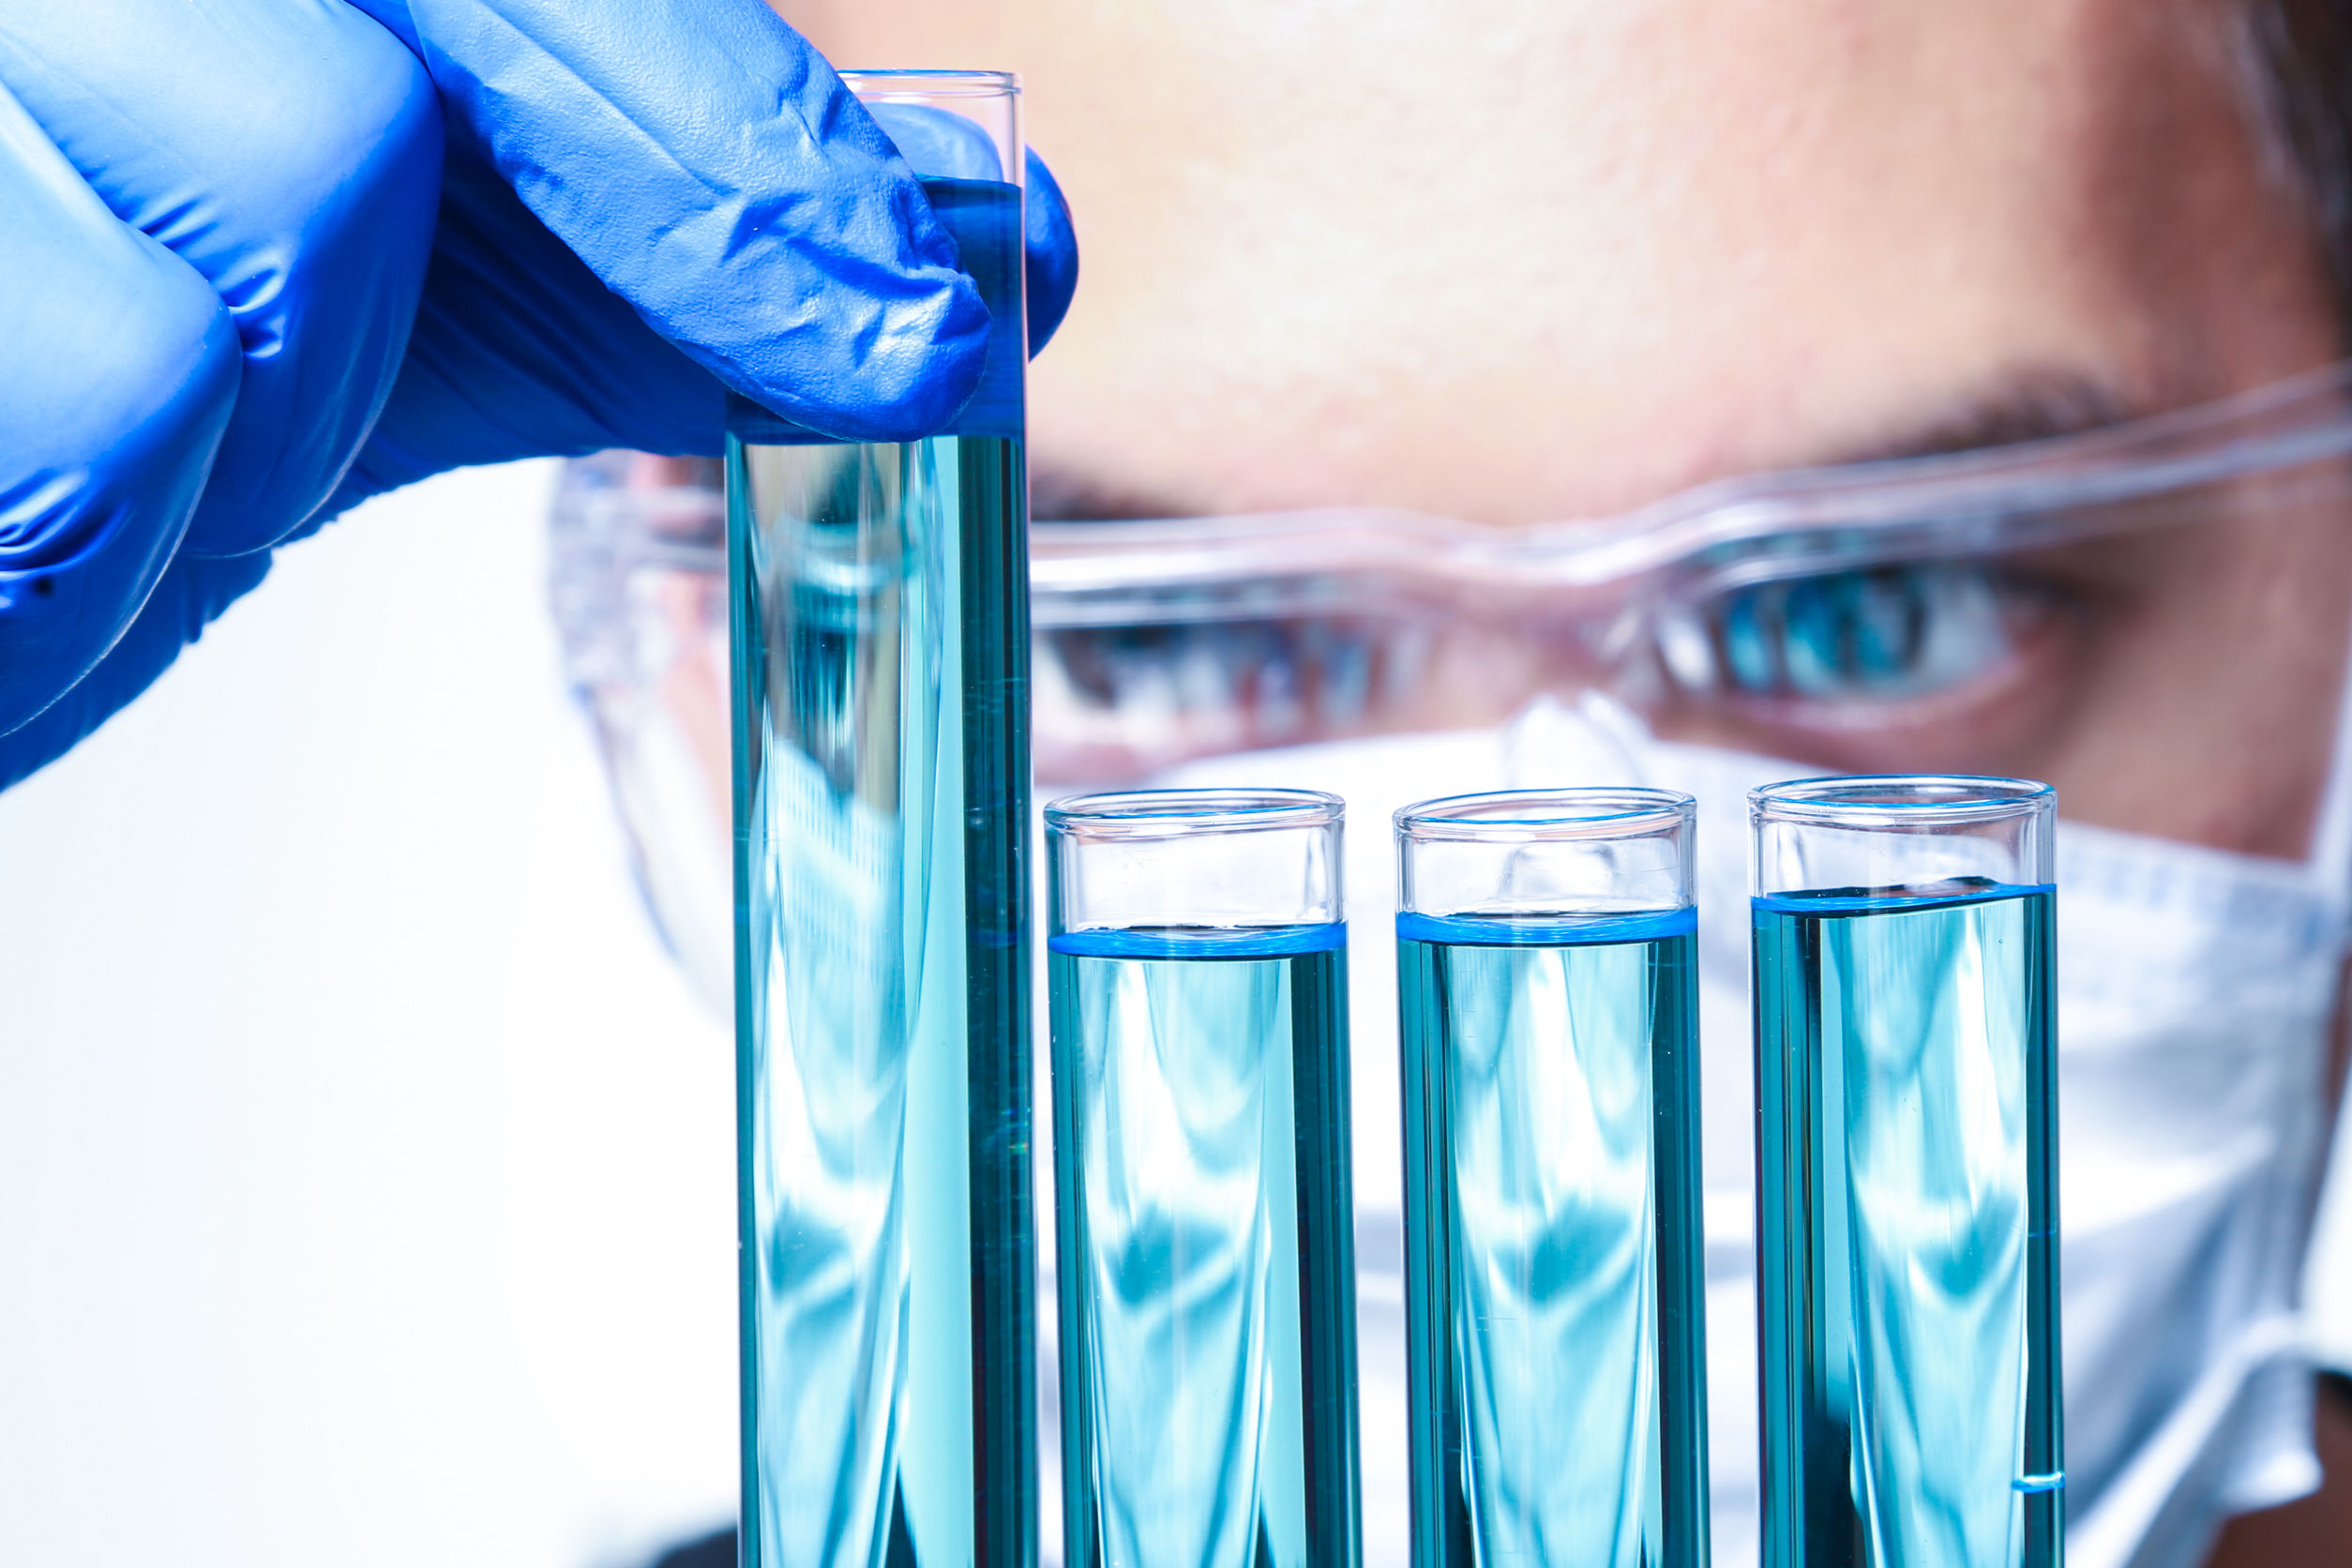 Scientist working in a lab looking at test tubes full of a blue substance